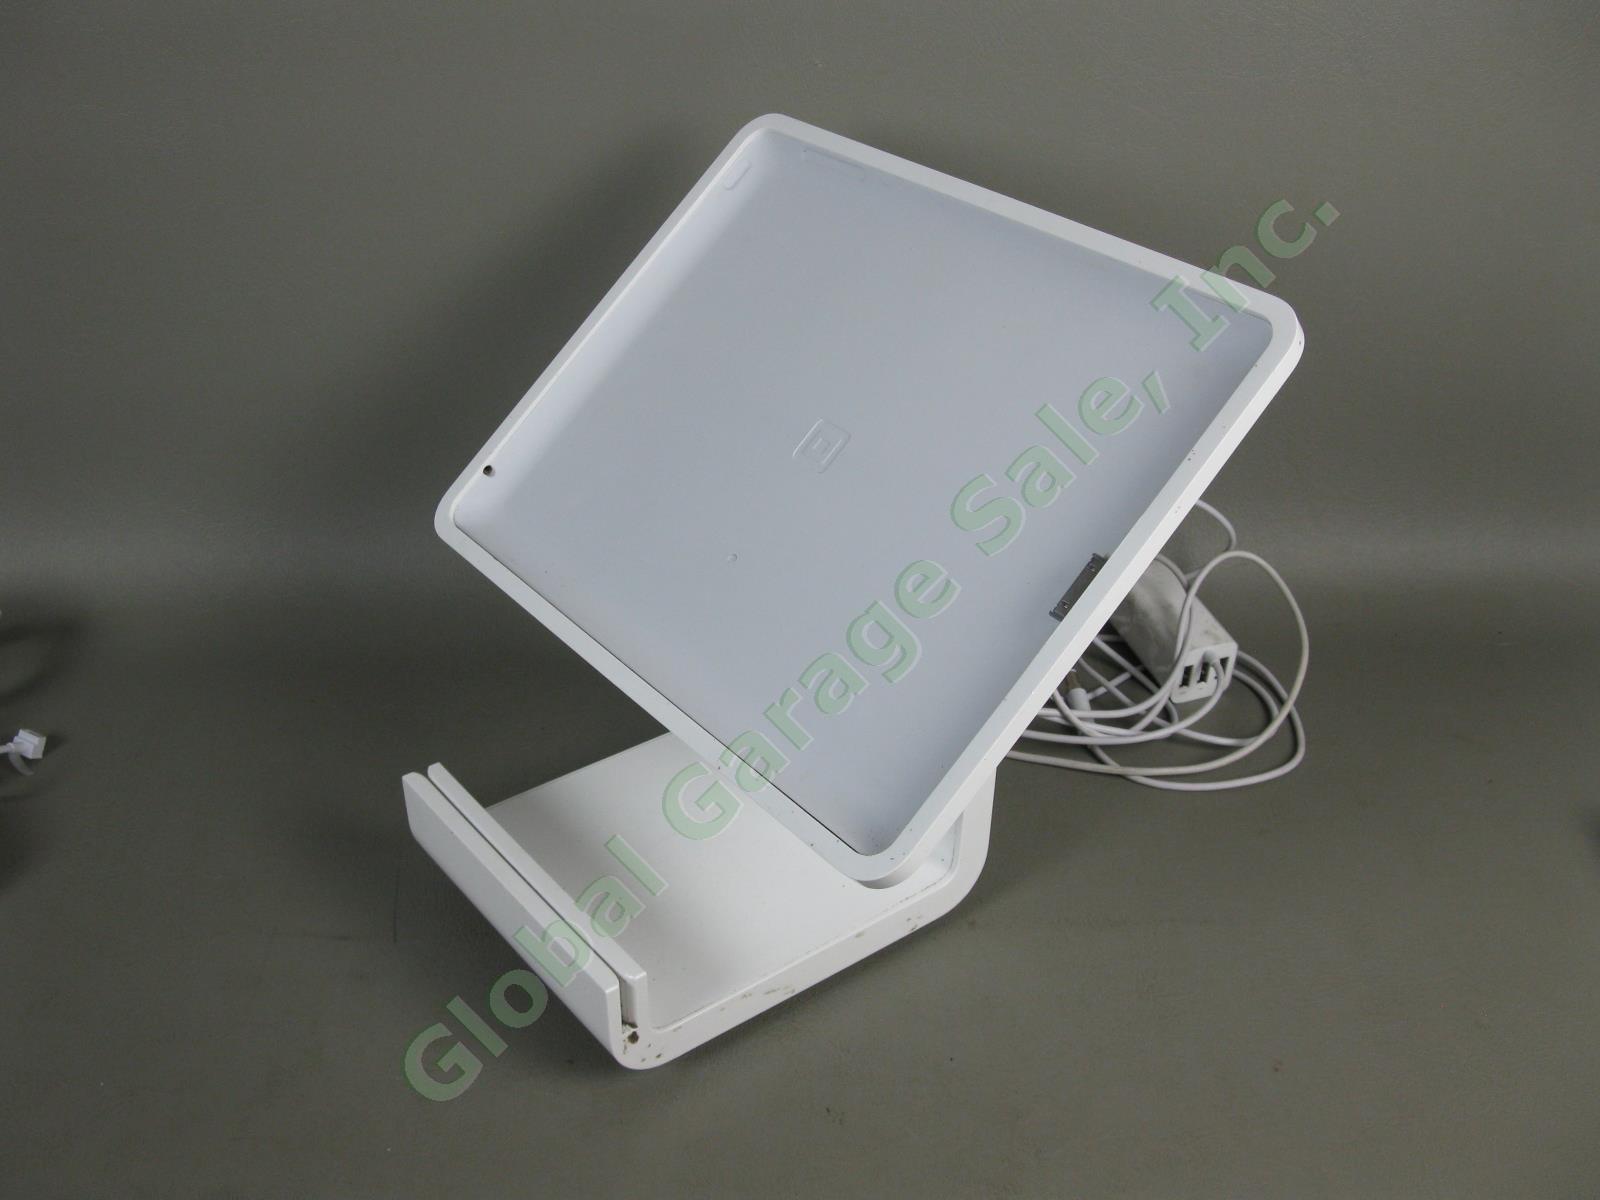 Square POS iPad 2/3 Stand S015 30-Pin w/4 Card Readers Xtra Power Supply Toolkit 1